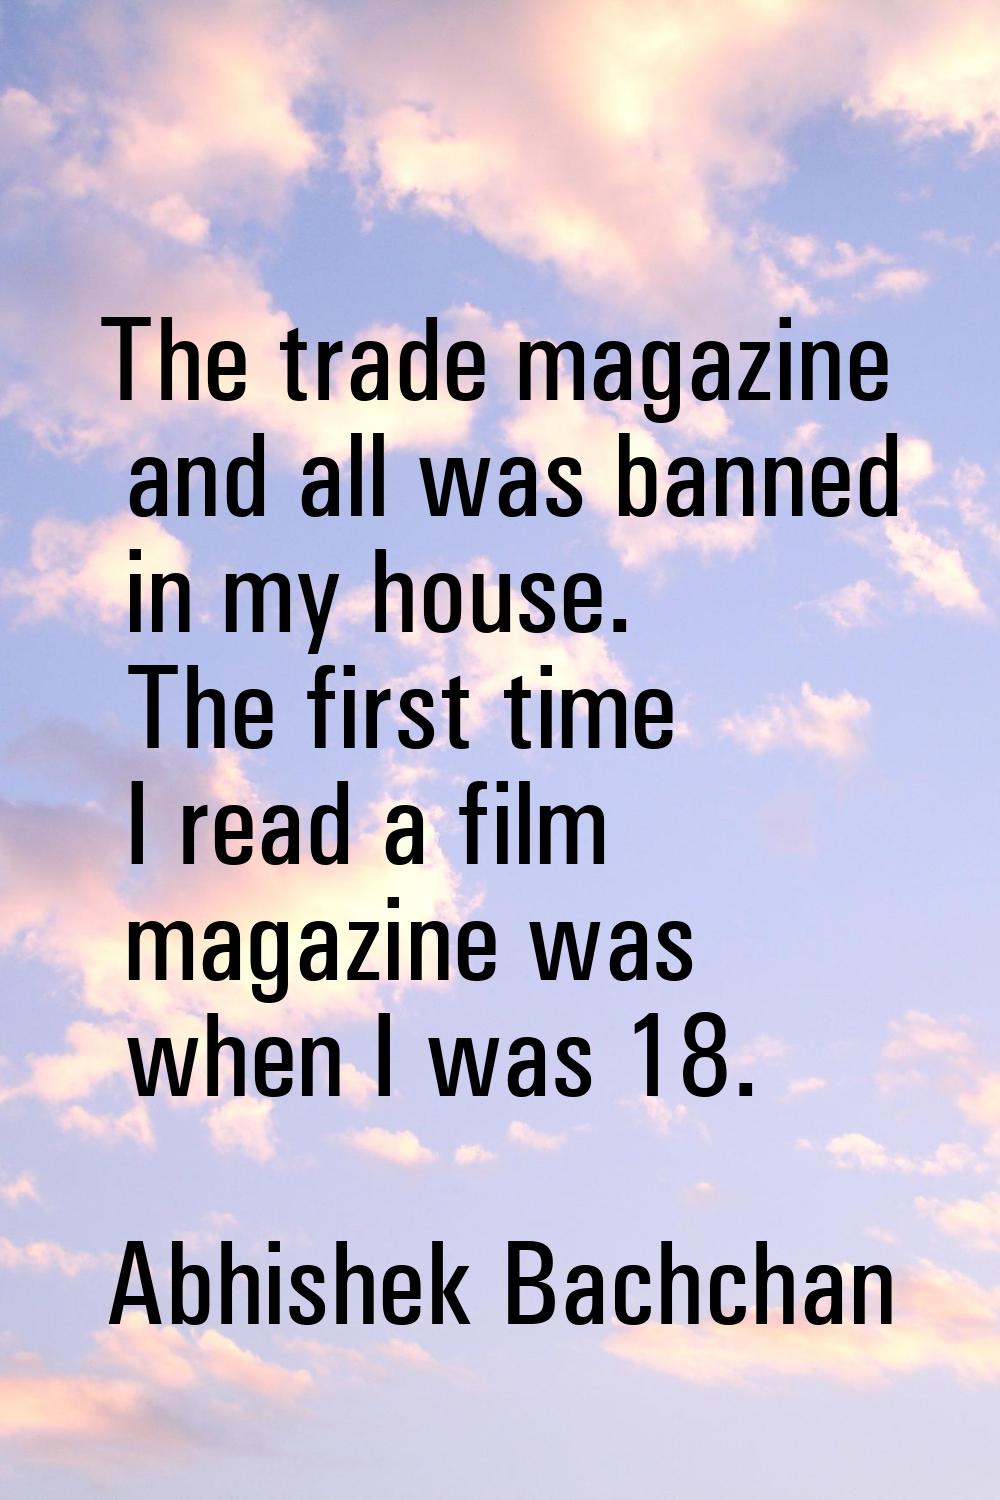 The trade magazine and all was banned in my house. The first time I read a film magazine was when I